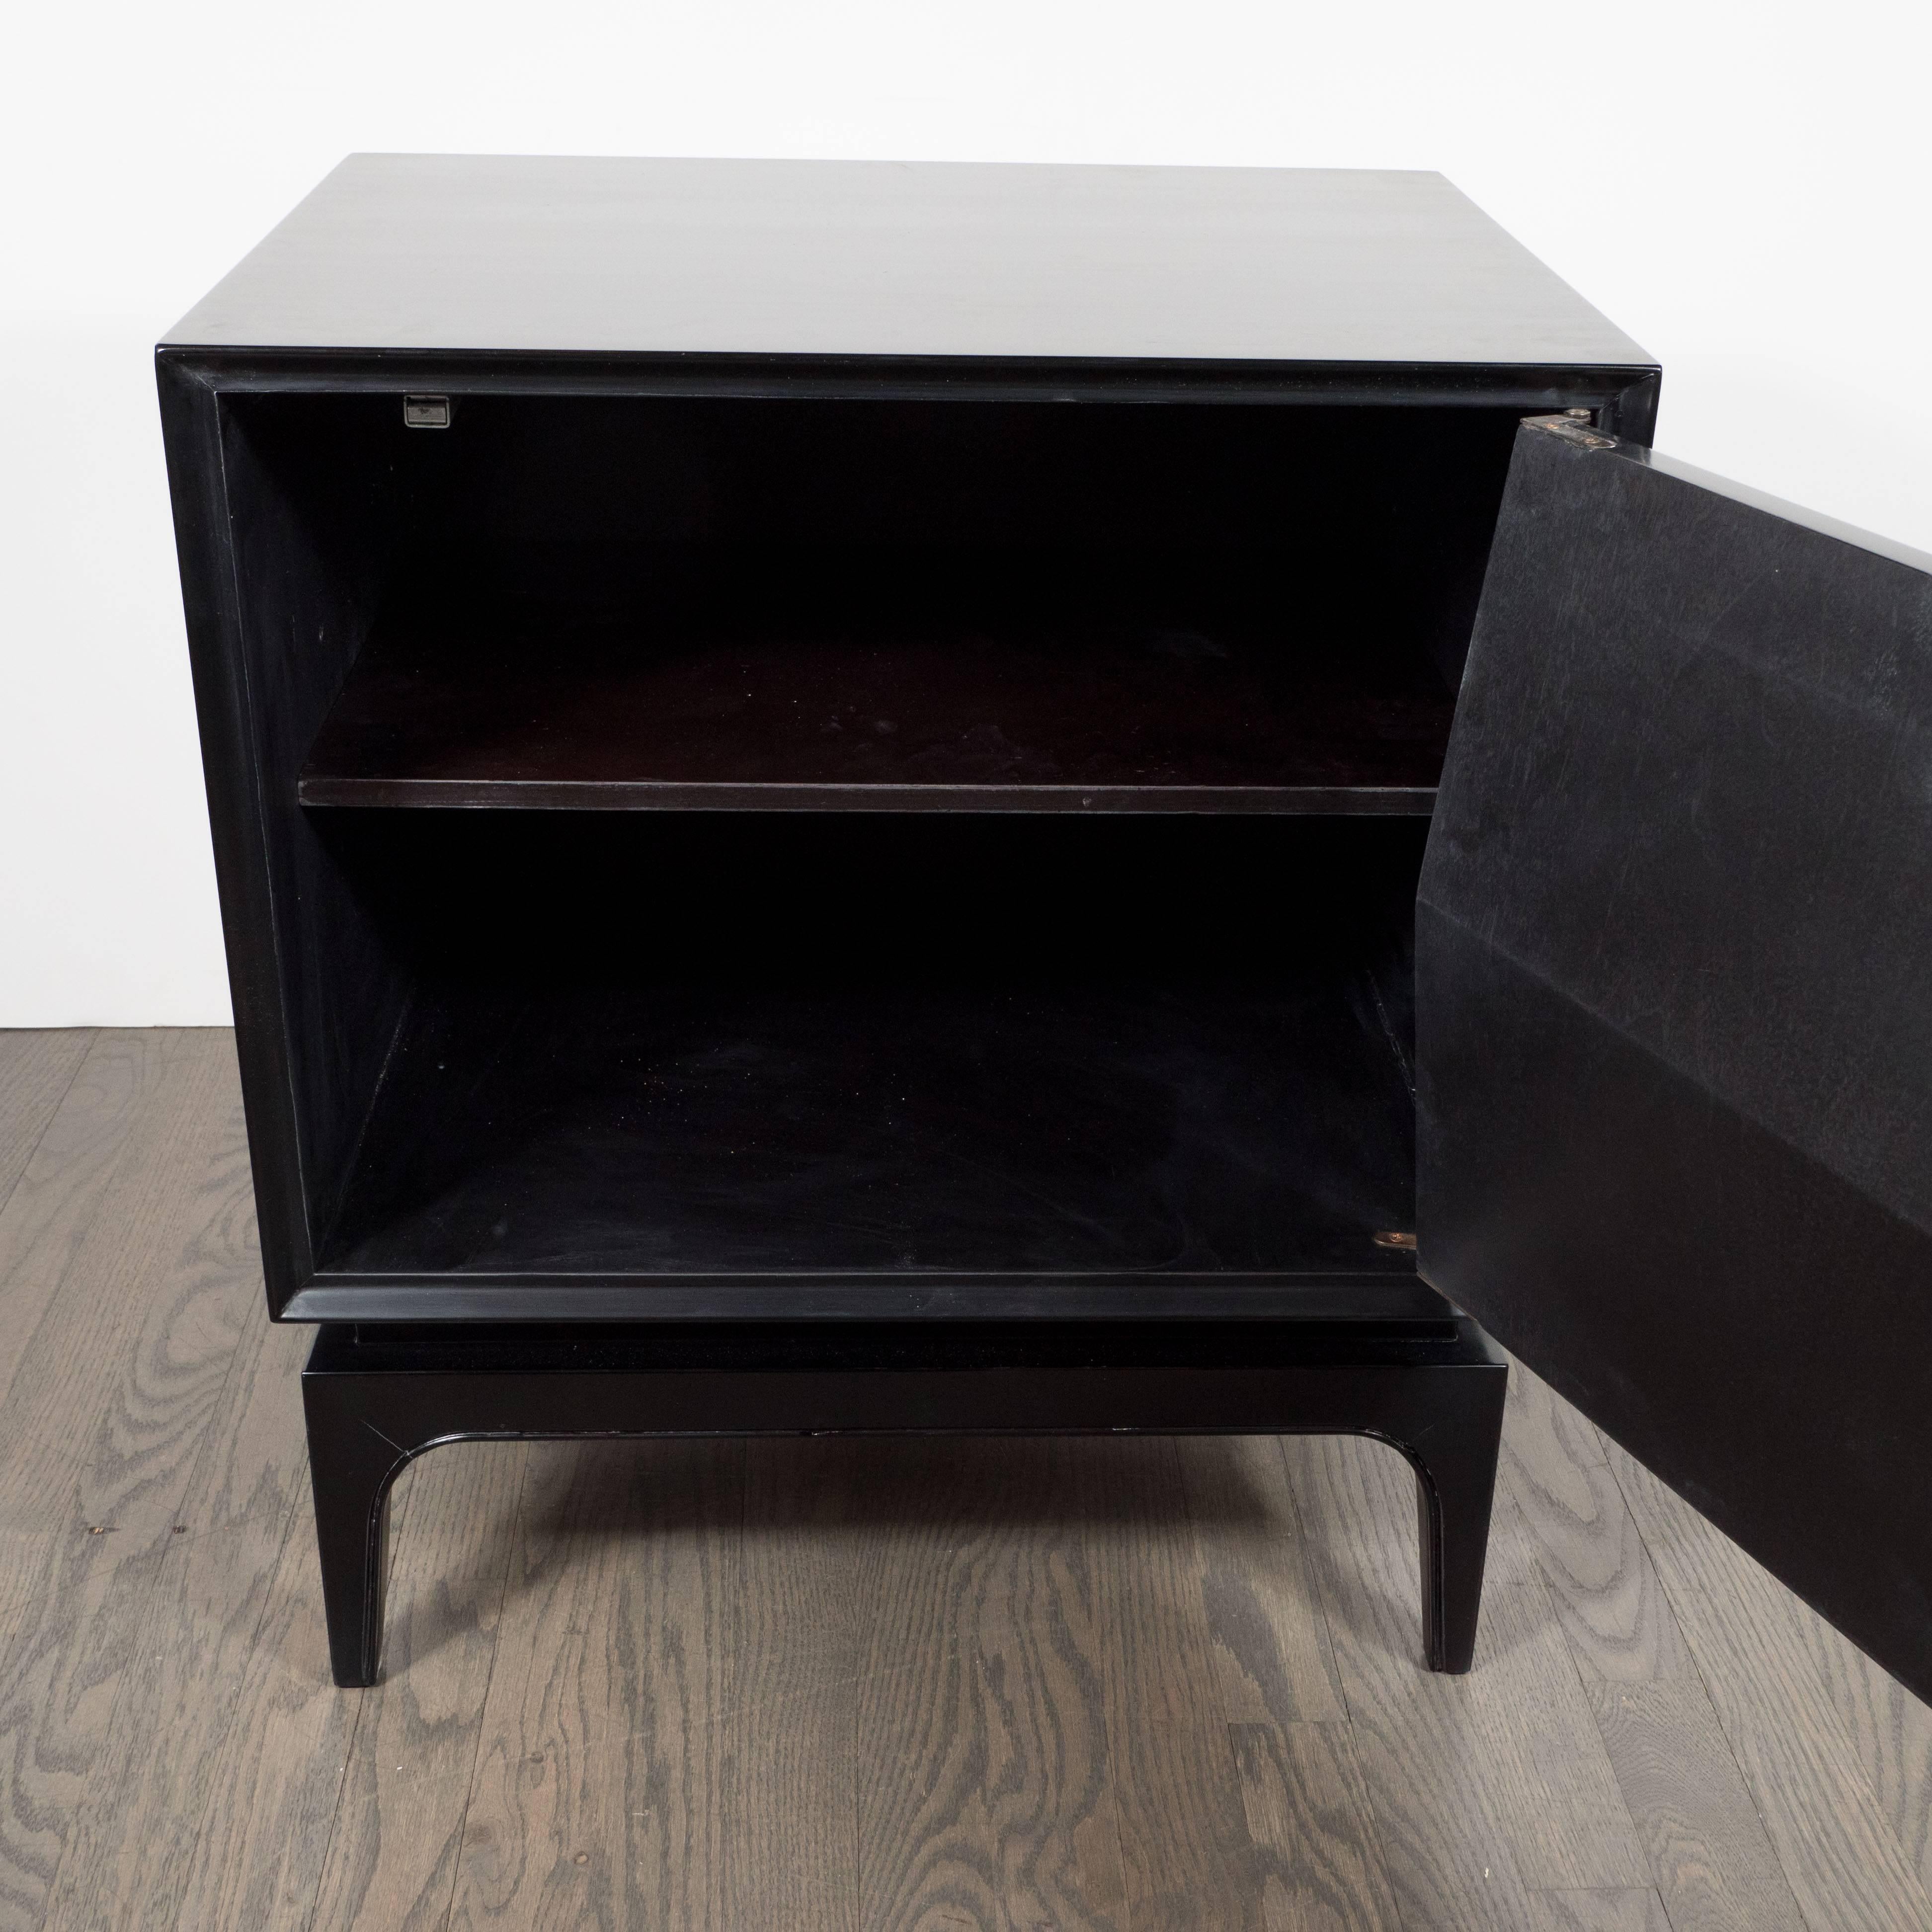 American Sculptural Pair of Ebonized Walnut Nightstands or End Tables with Diamond Front